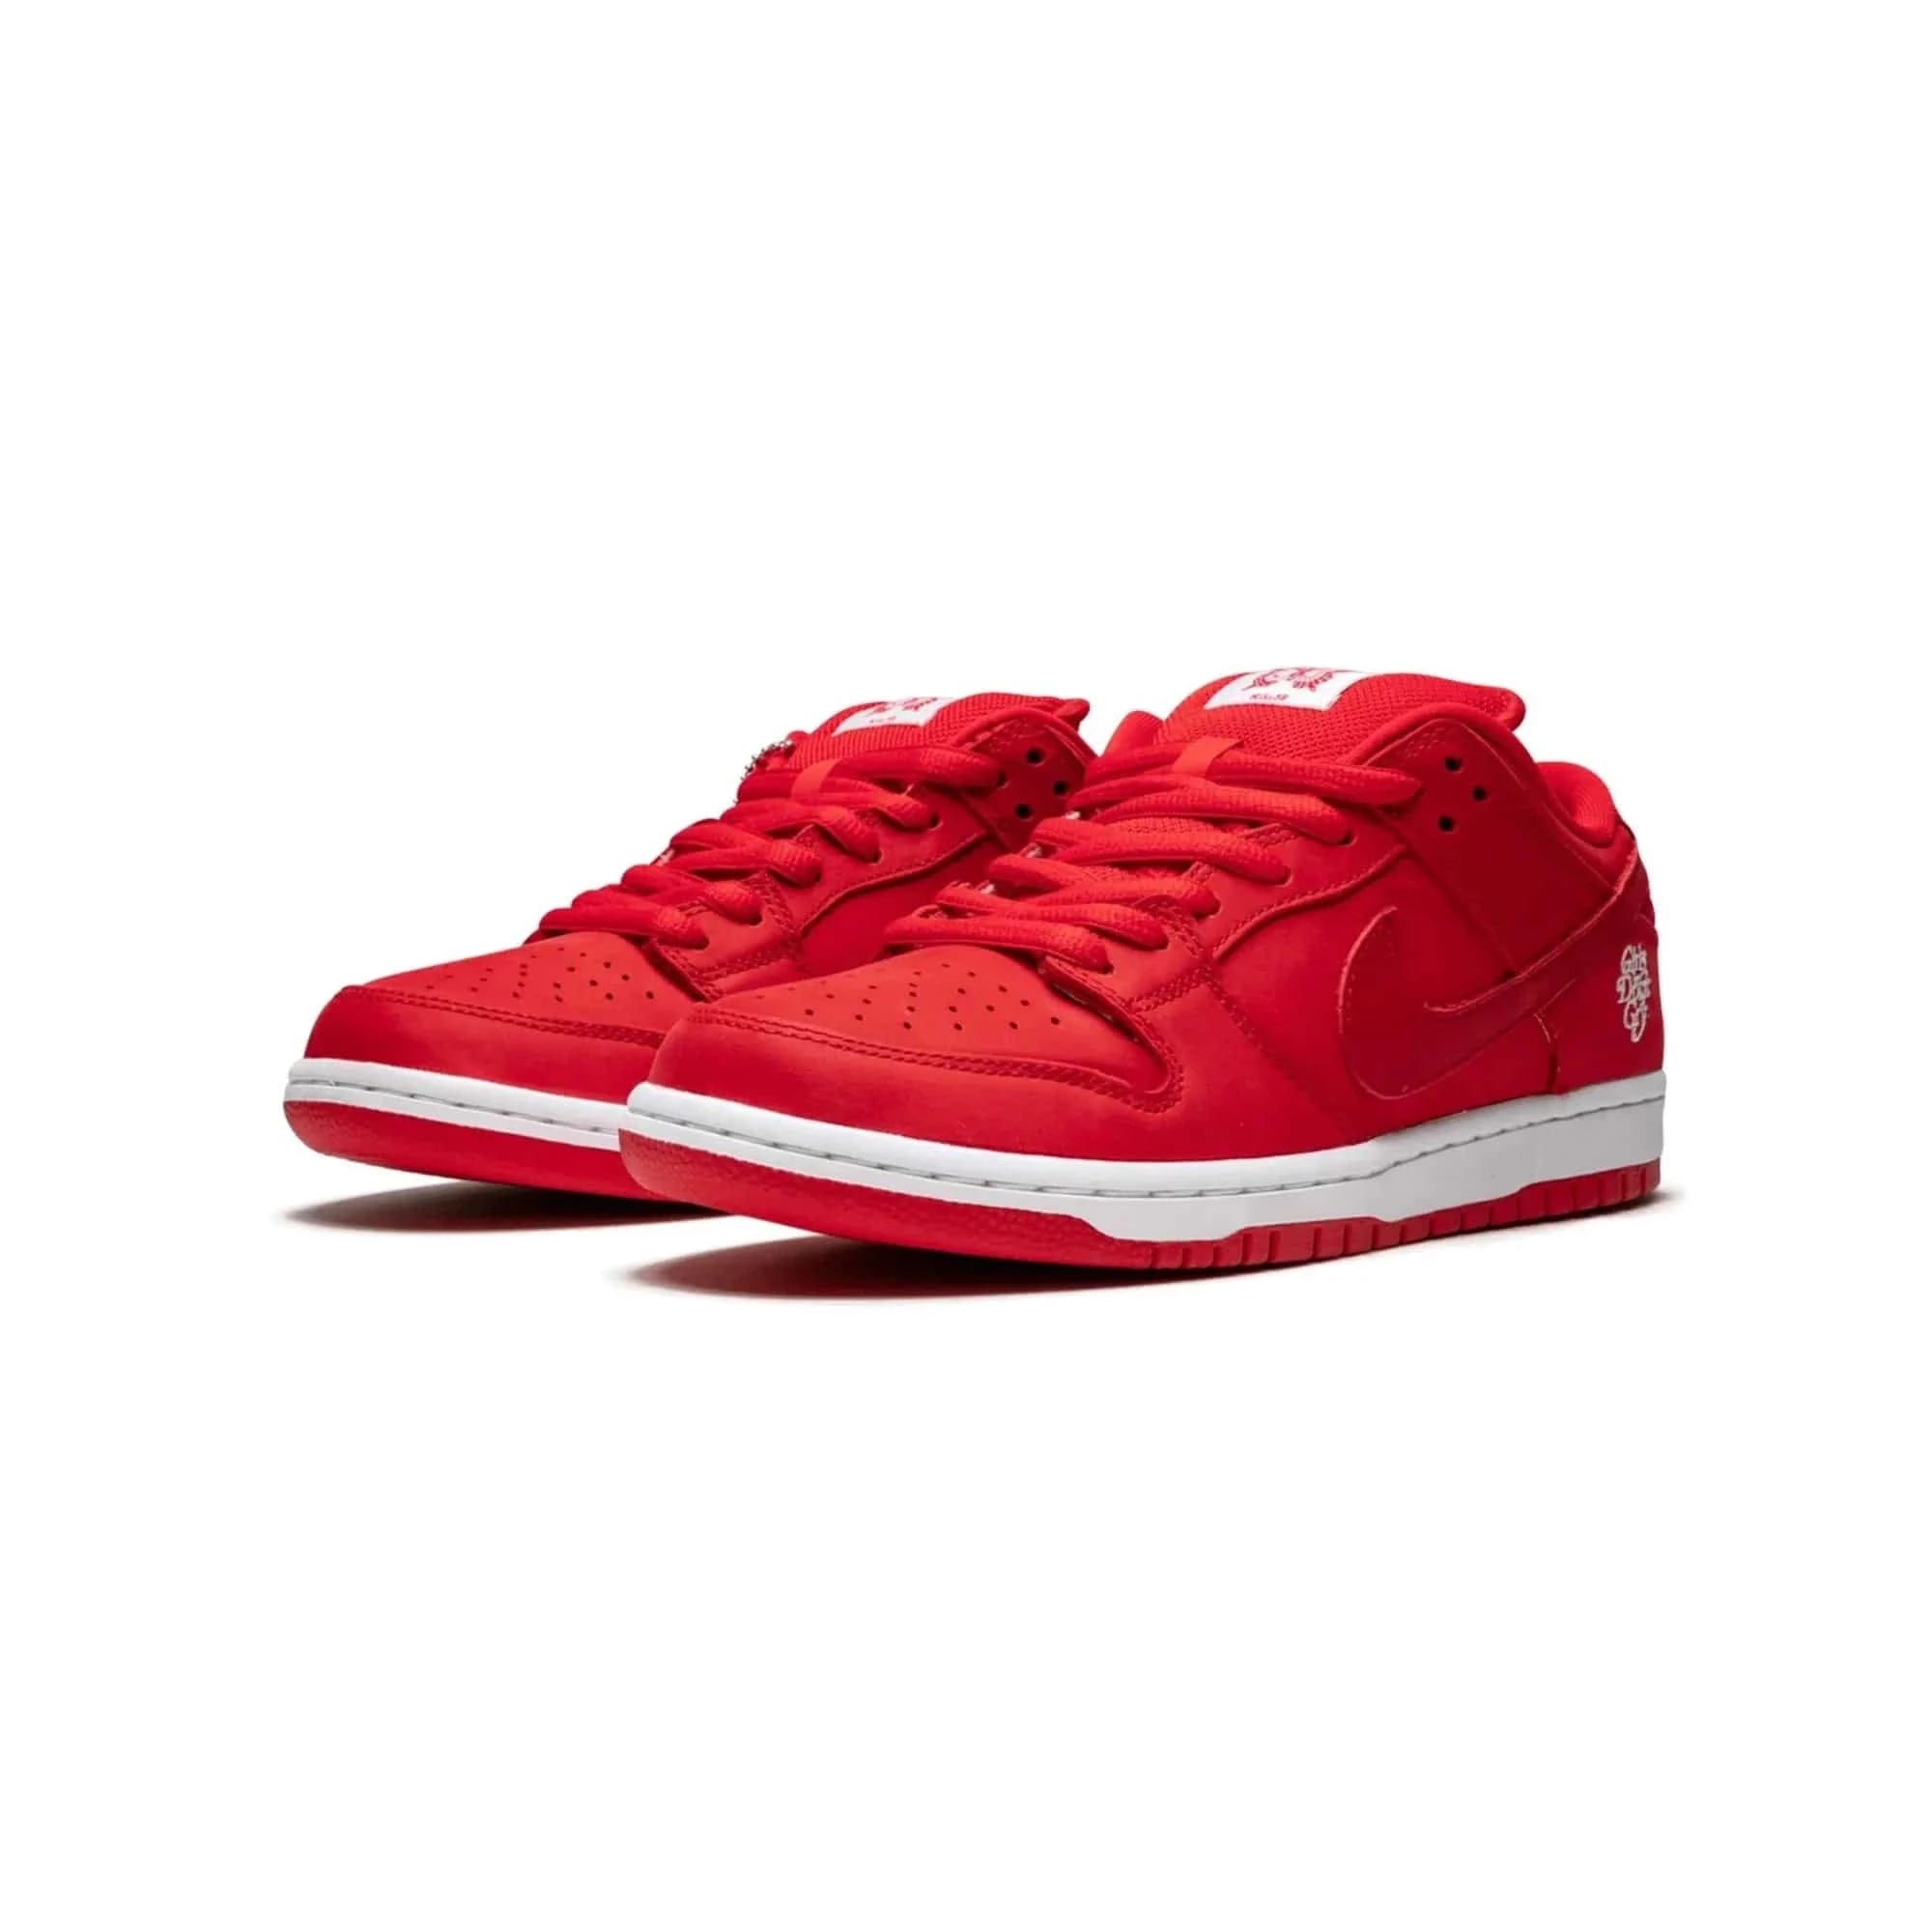 Nike SB Dunk Low Verdy Girls Don't Cry | ABco